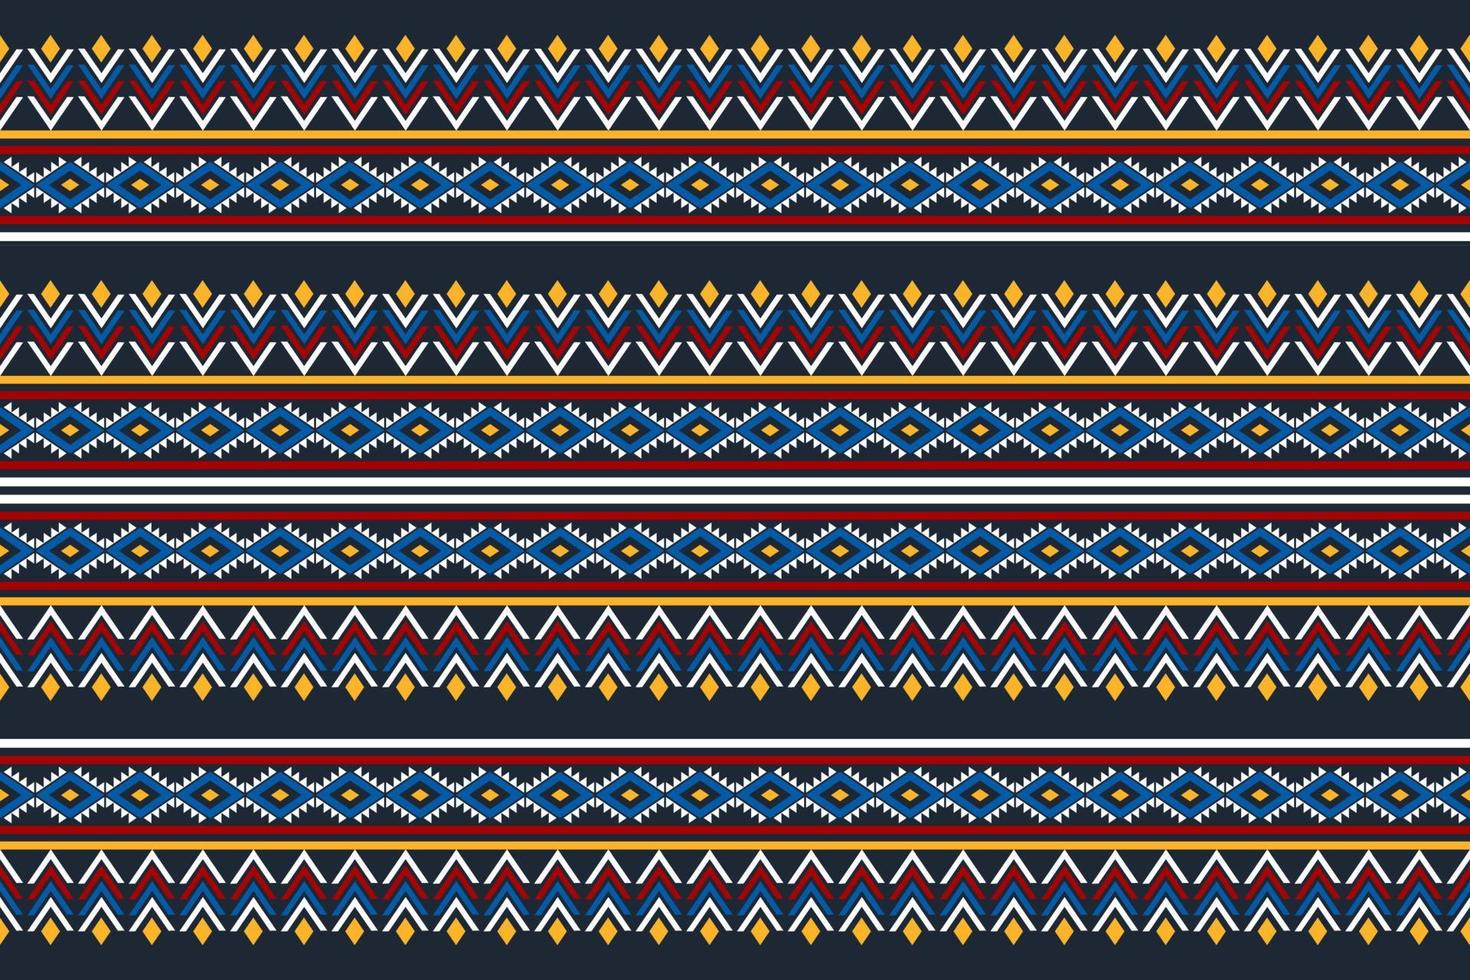 Geometric ethnic seamless pattern in tribal. American, Mexican style. Design for background, wallpaper, vector illustration, fabric, clothing, carpet, textile, batik, embroidery.